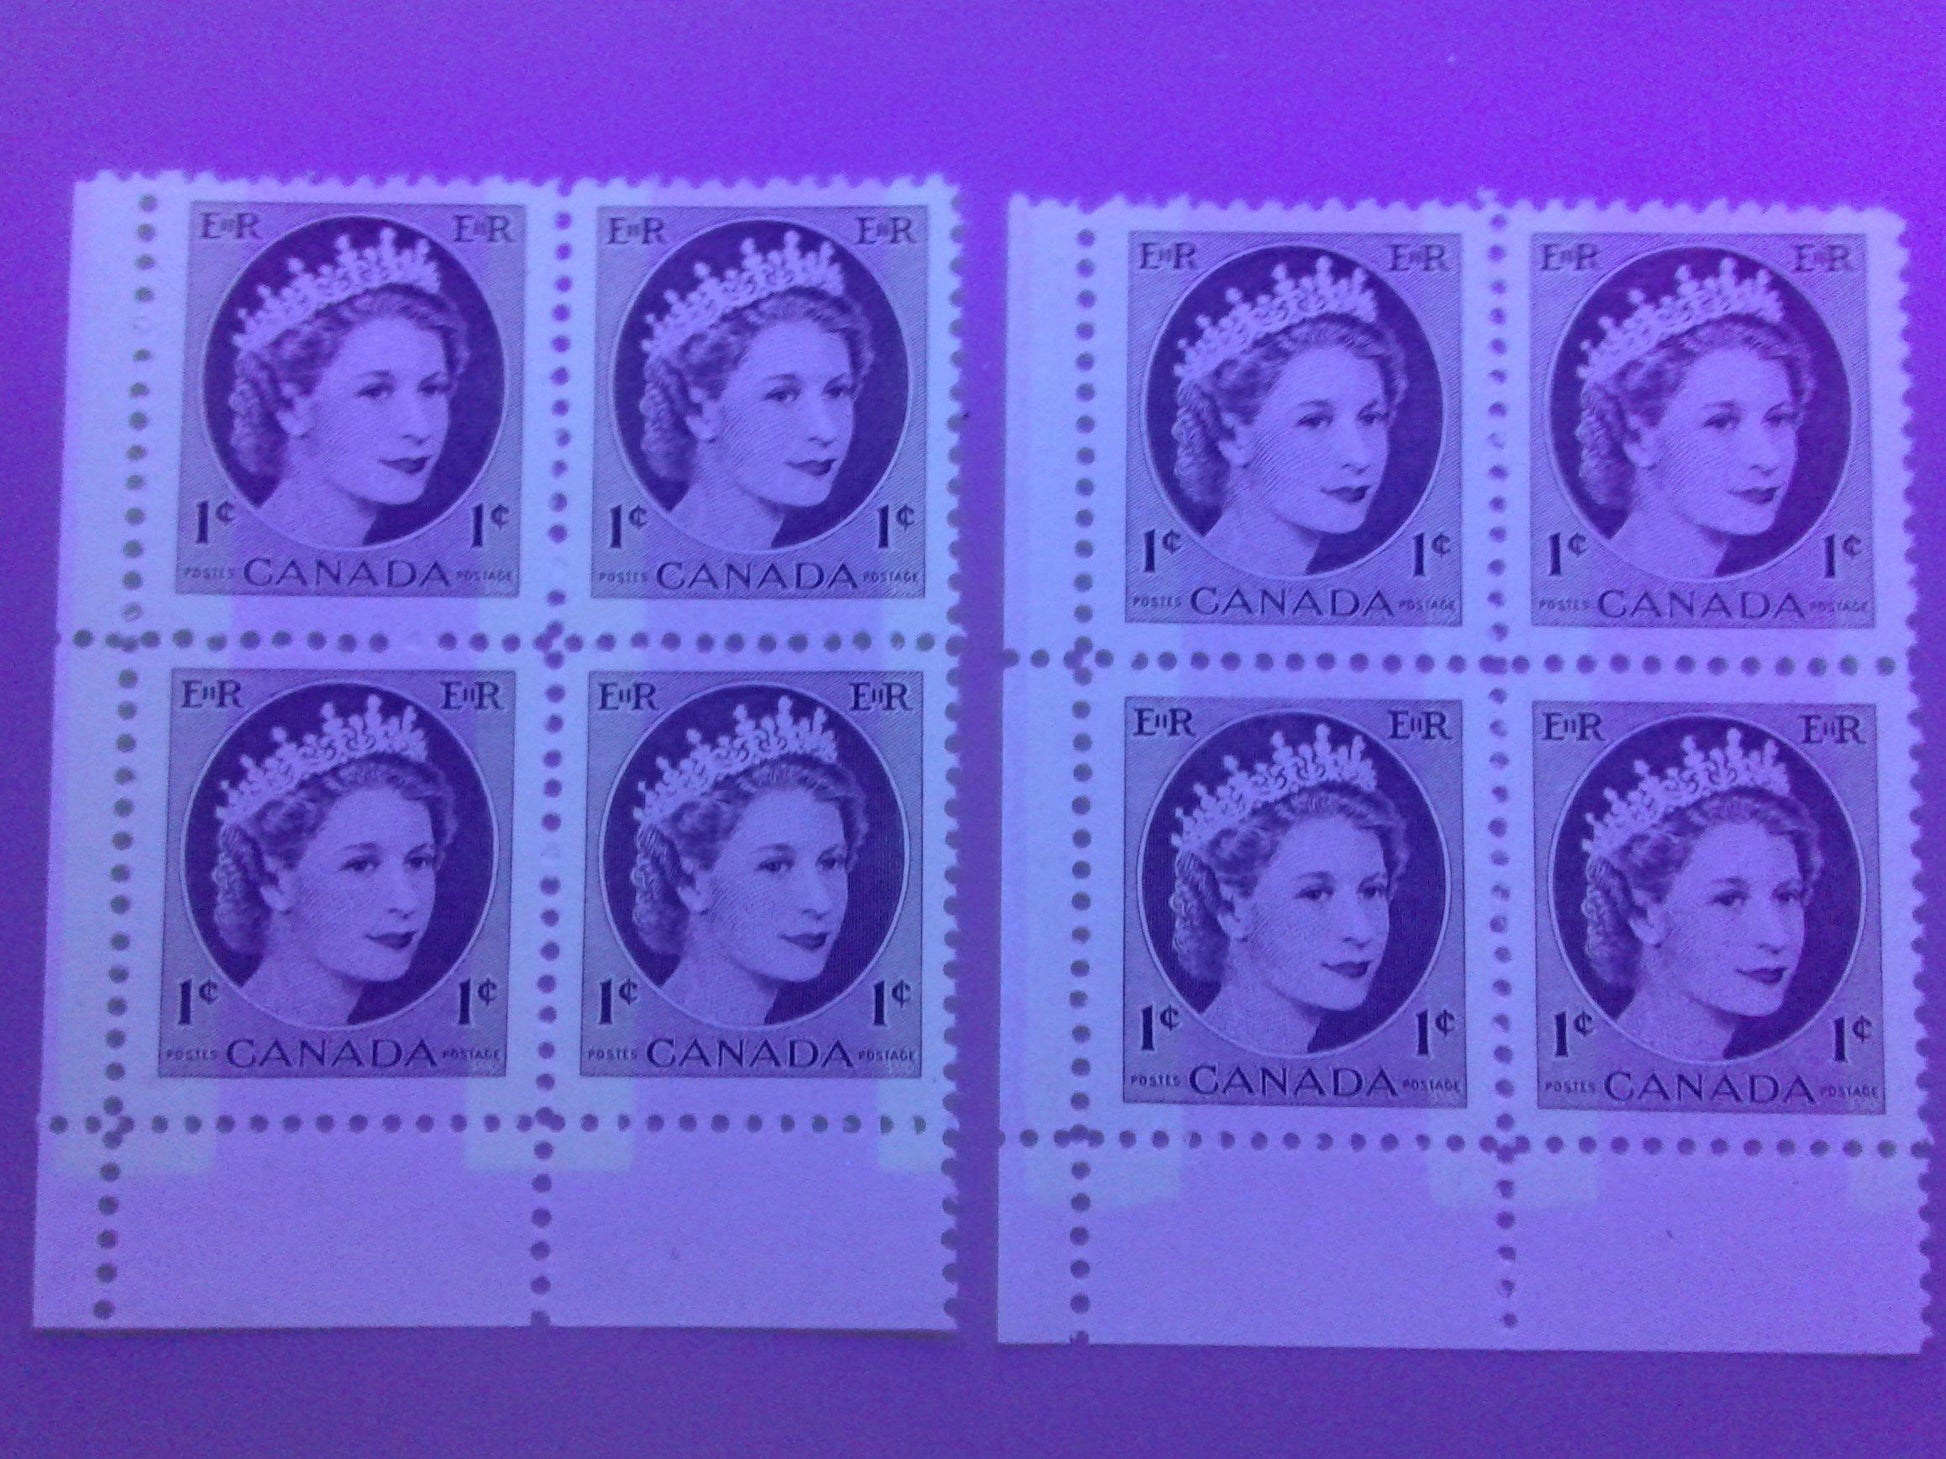 Canada #337p(var) 1c Chocolate Queen Elizabeth II, 1954-1962 Wilding Issue, Upper Left Blank Winnipeg Tagged Blocks of 4, Three Different, Various Perfs., DF Gr Vertically Ribbed Paper, Streaky Semi Gloss Gum, Light Yellow Tagging, Crooked Perfs., VFNH Brixton Chrome 